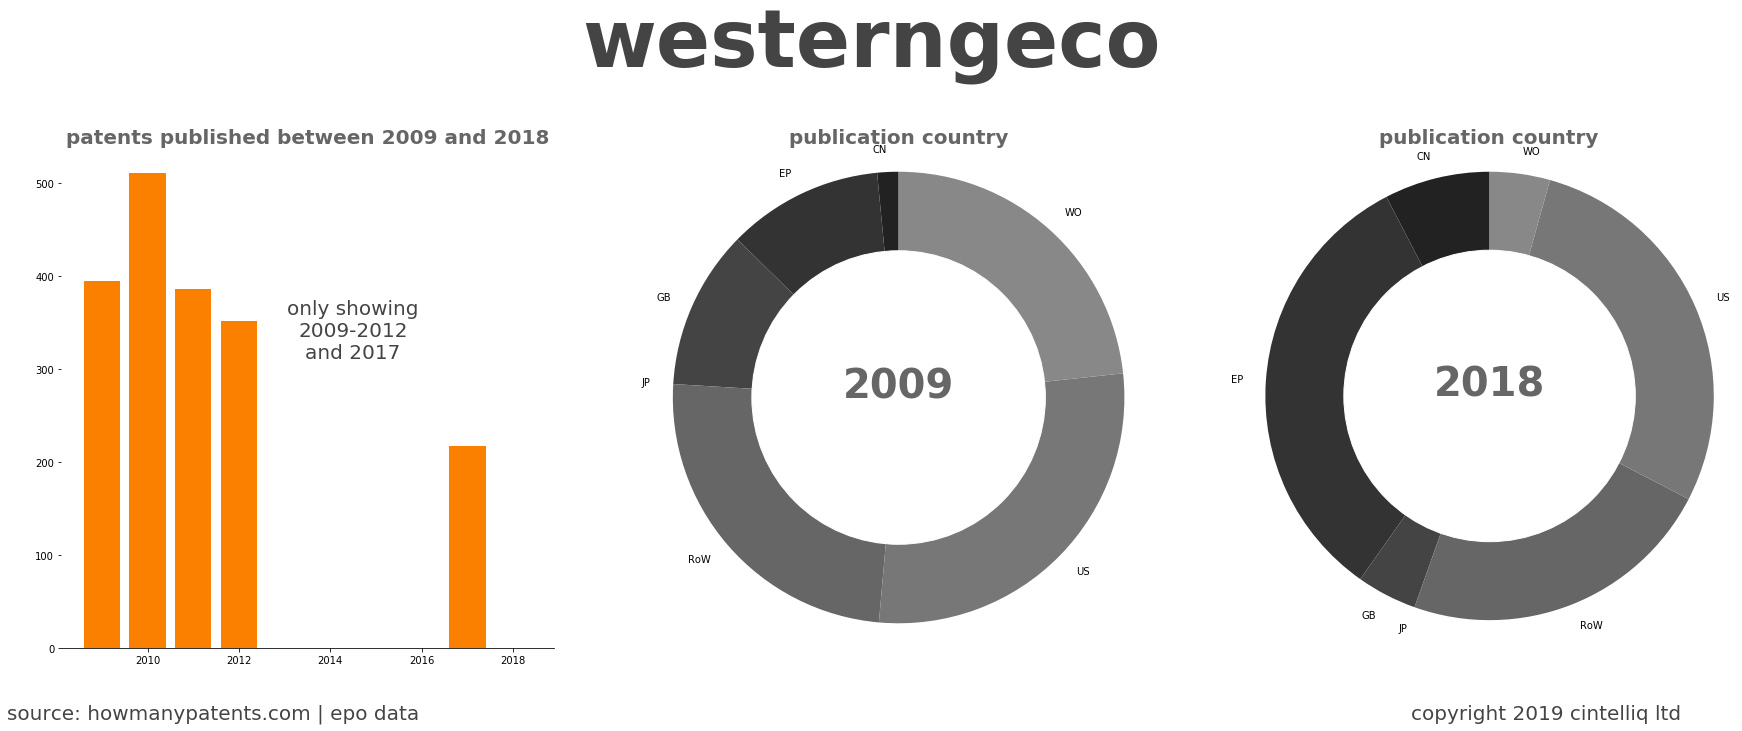 summary of patents for Westerngeco